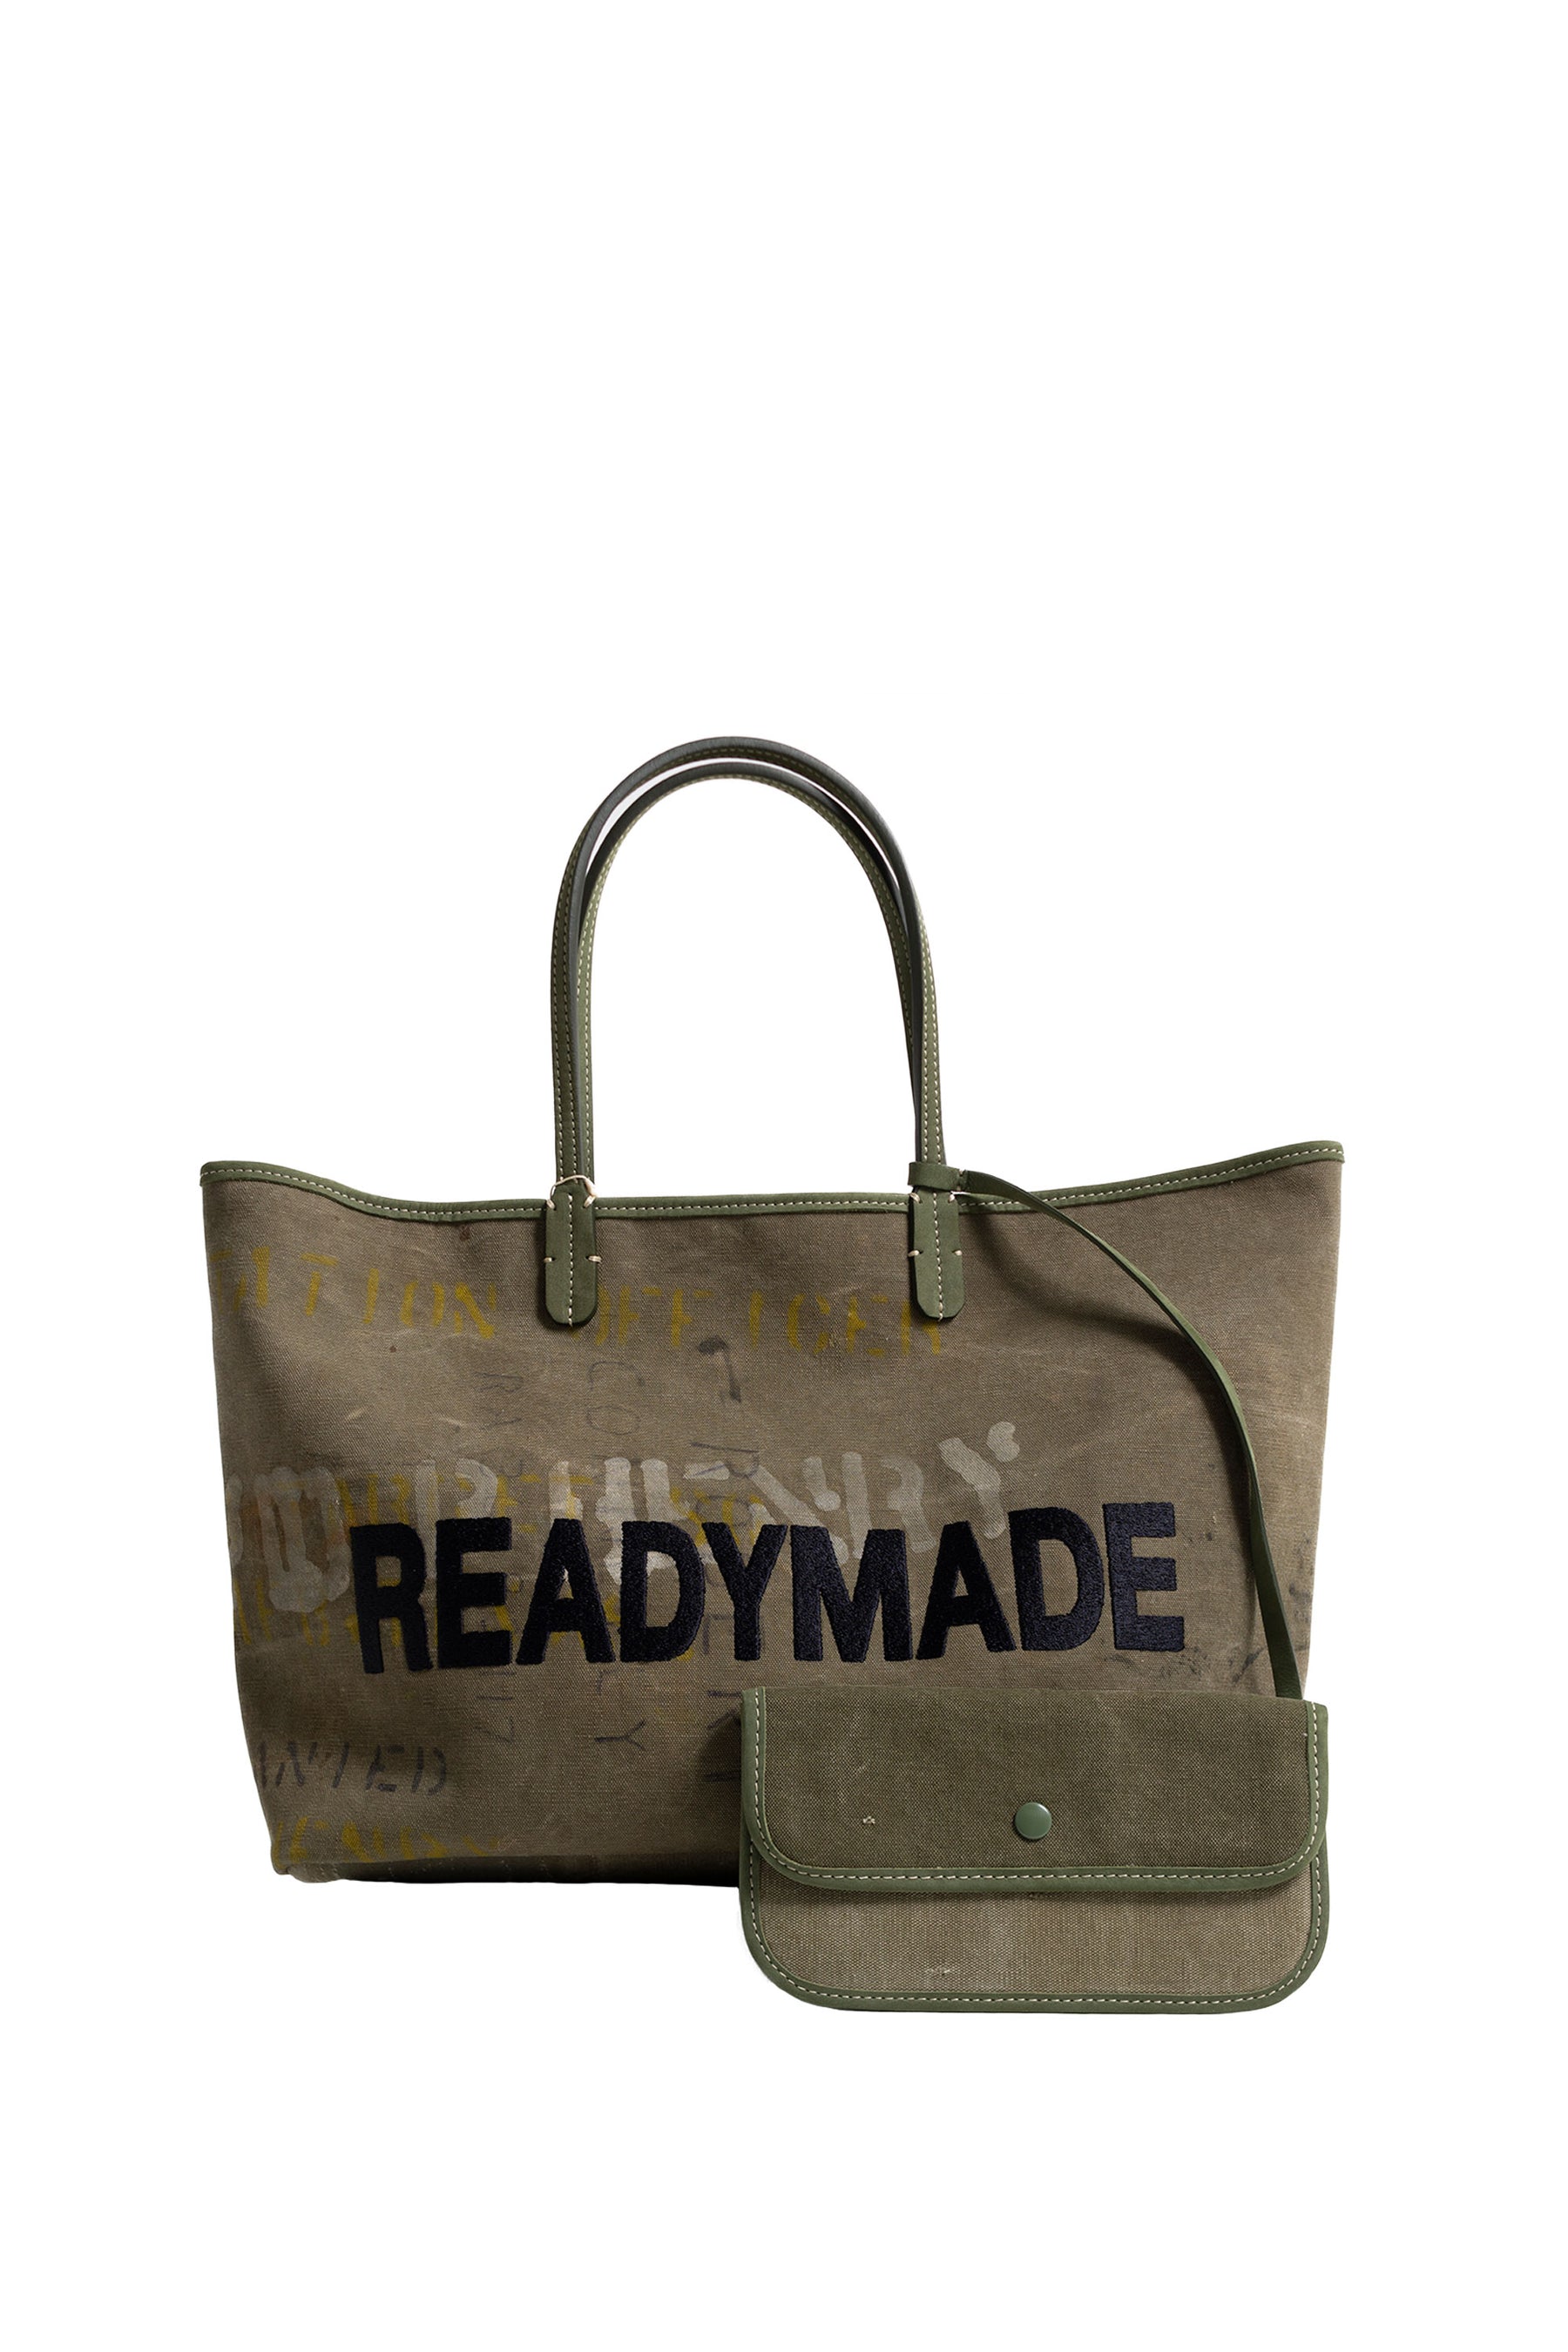 Readymade x Dr. Woo Doll Bag - Green – Feature